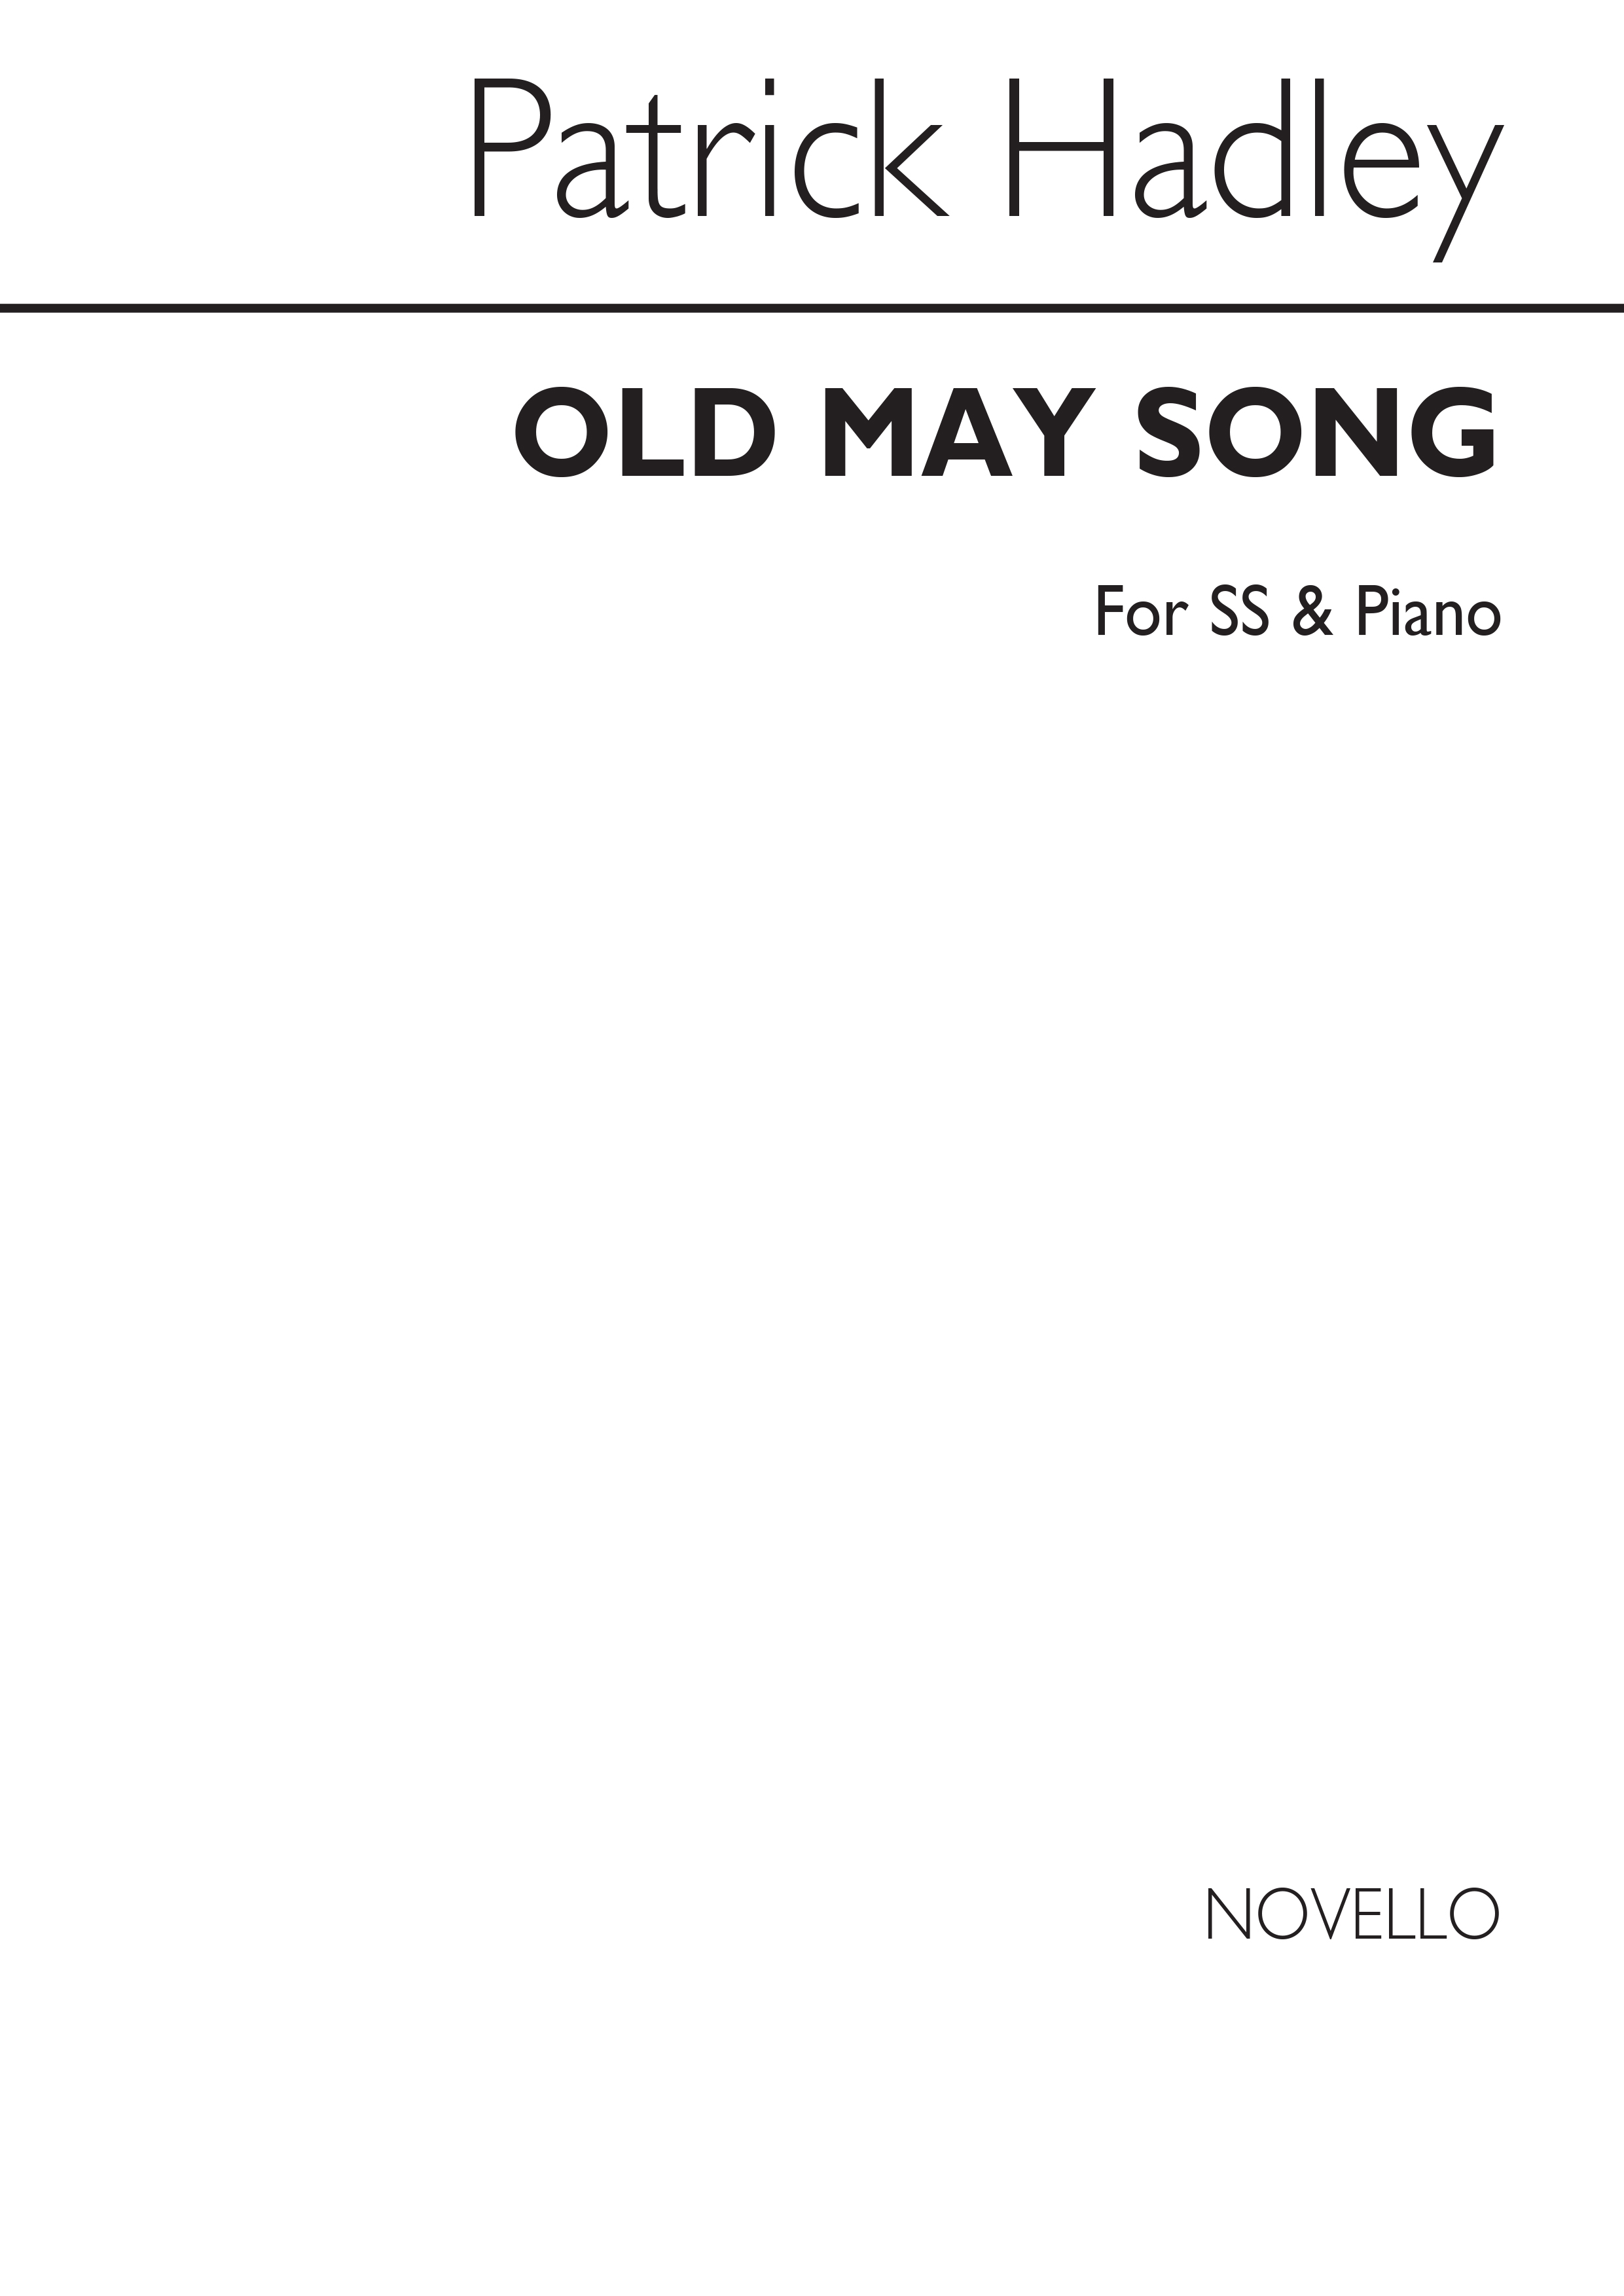 Hadley: Old May Song for SS and Piano